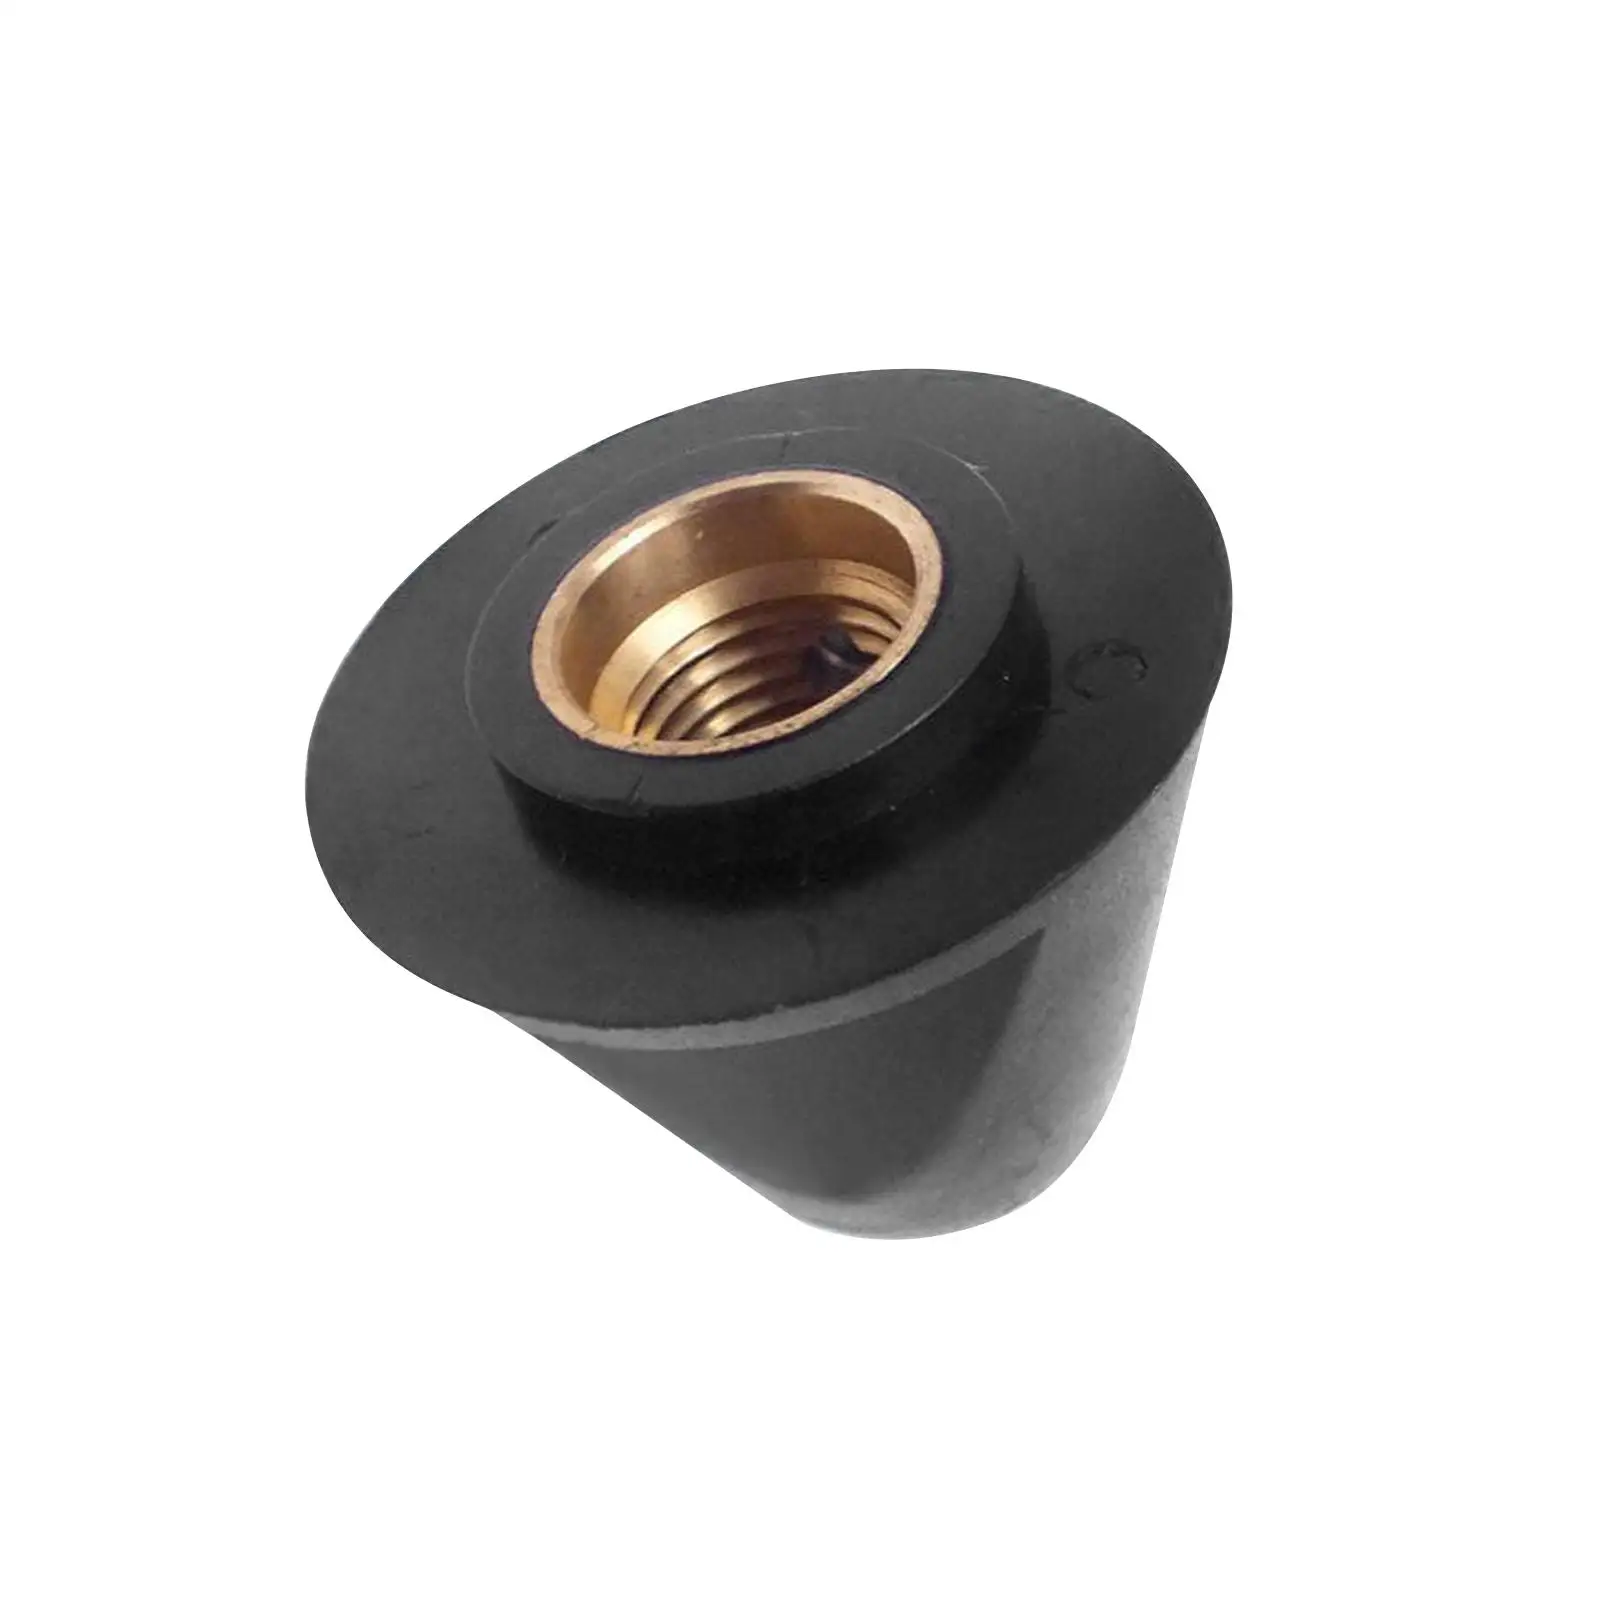 Propeller Nut 647-45616-02-00 for Yamaha Outboard Engine 4HP 5HP 2T